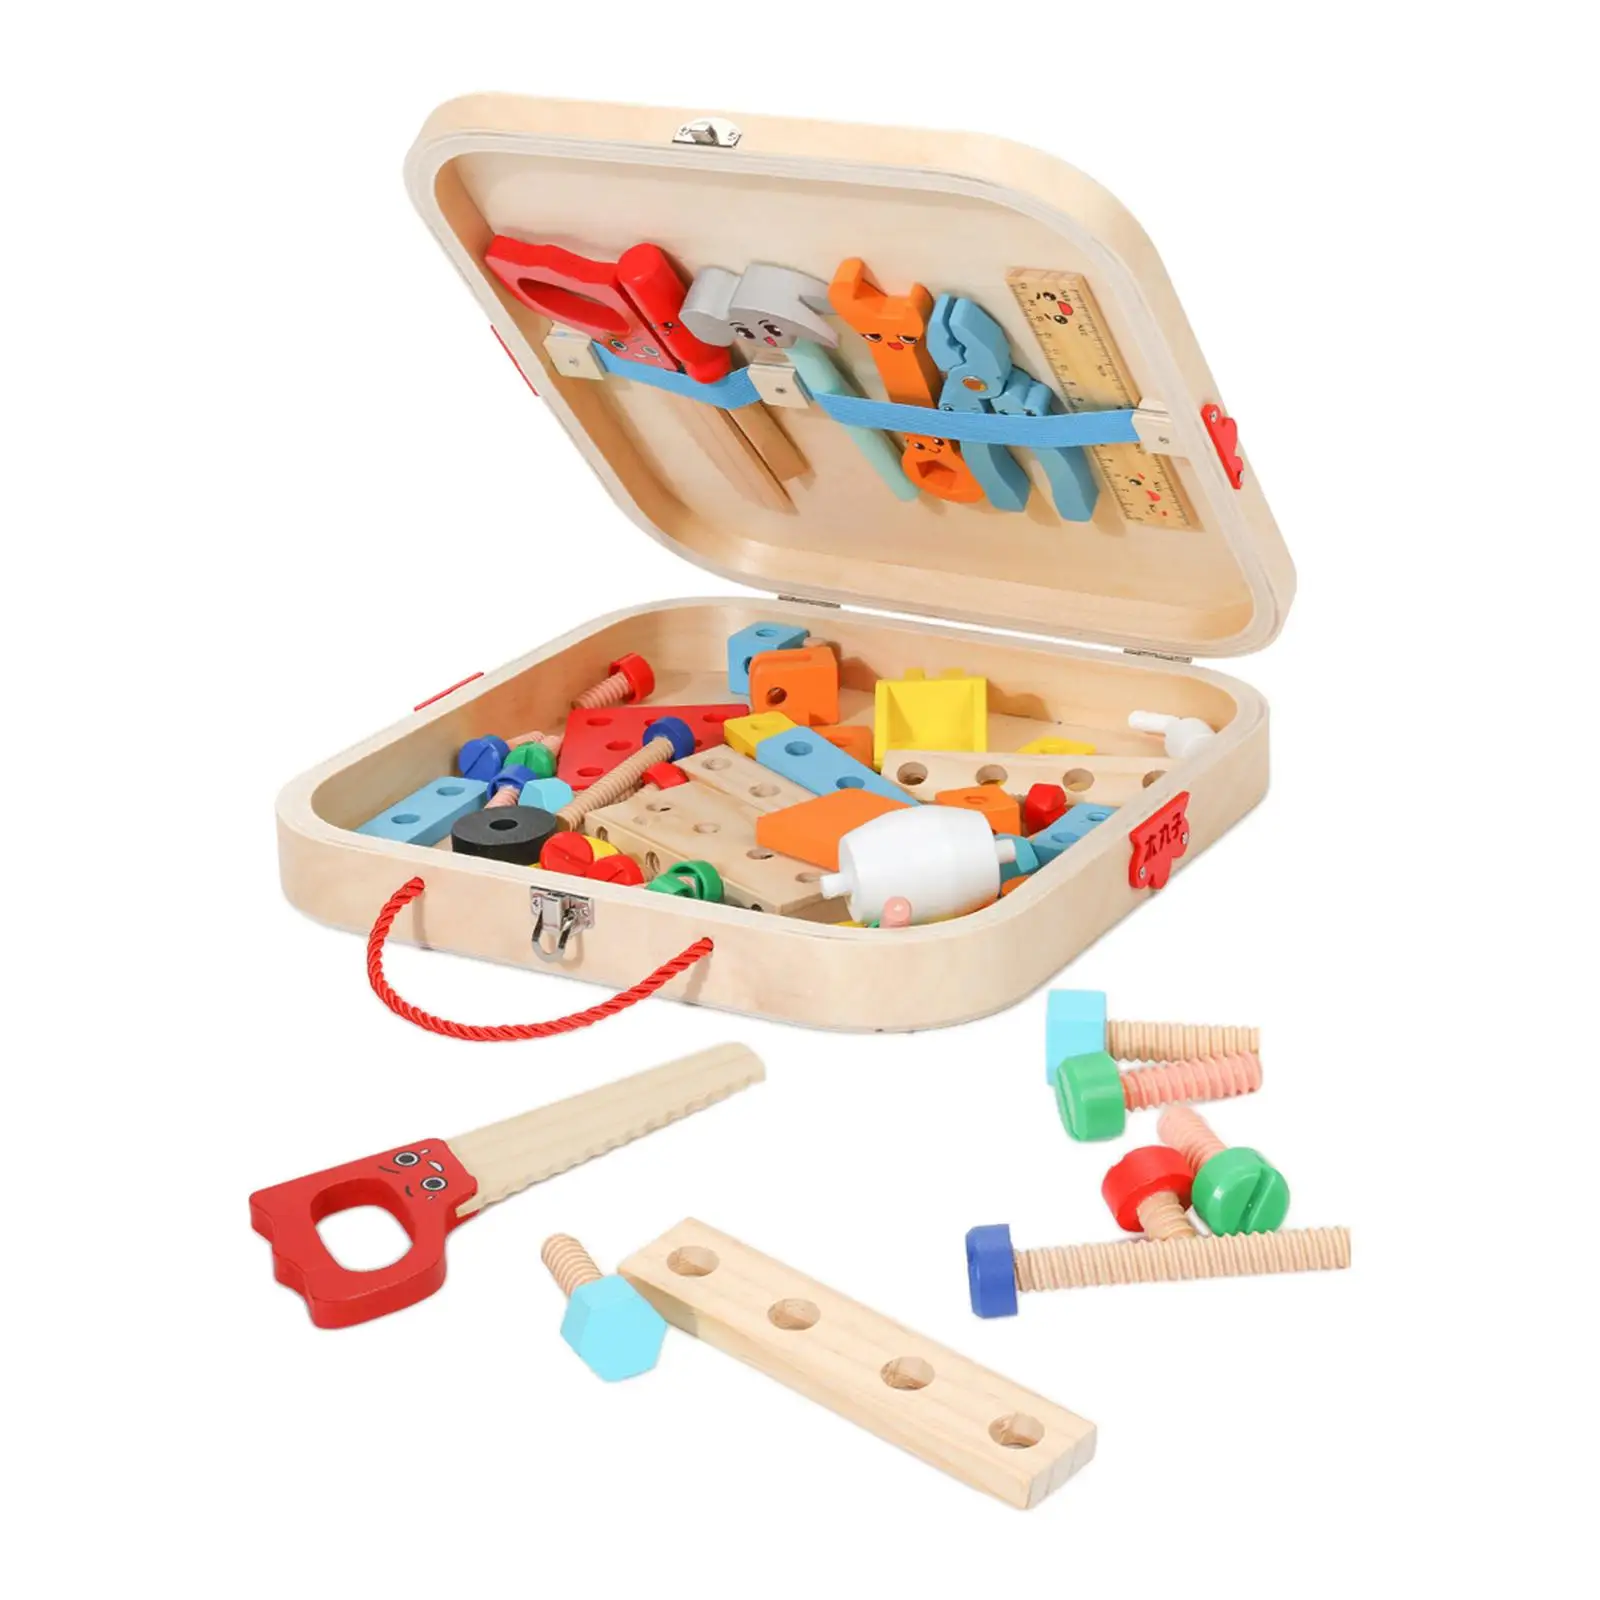 Wooden Kid Tool Set Construction Toy Set Montessori Educational Toy Wooden Toy Tool Box for Birthday Gift Home Bedroom DIY Baby